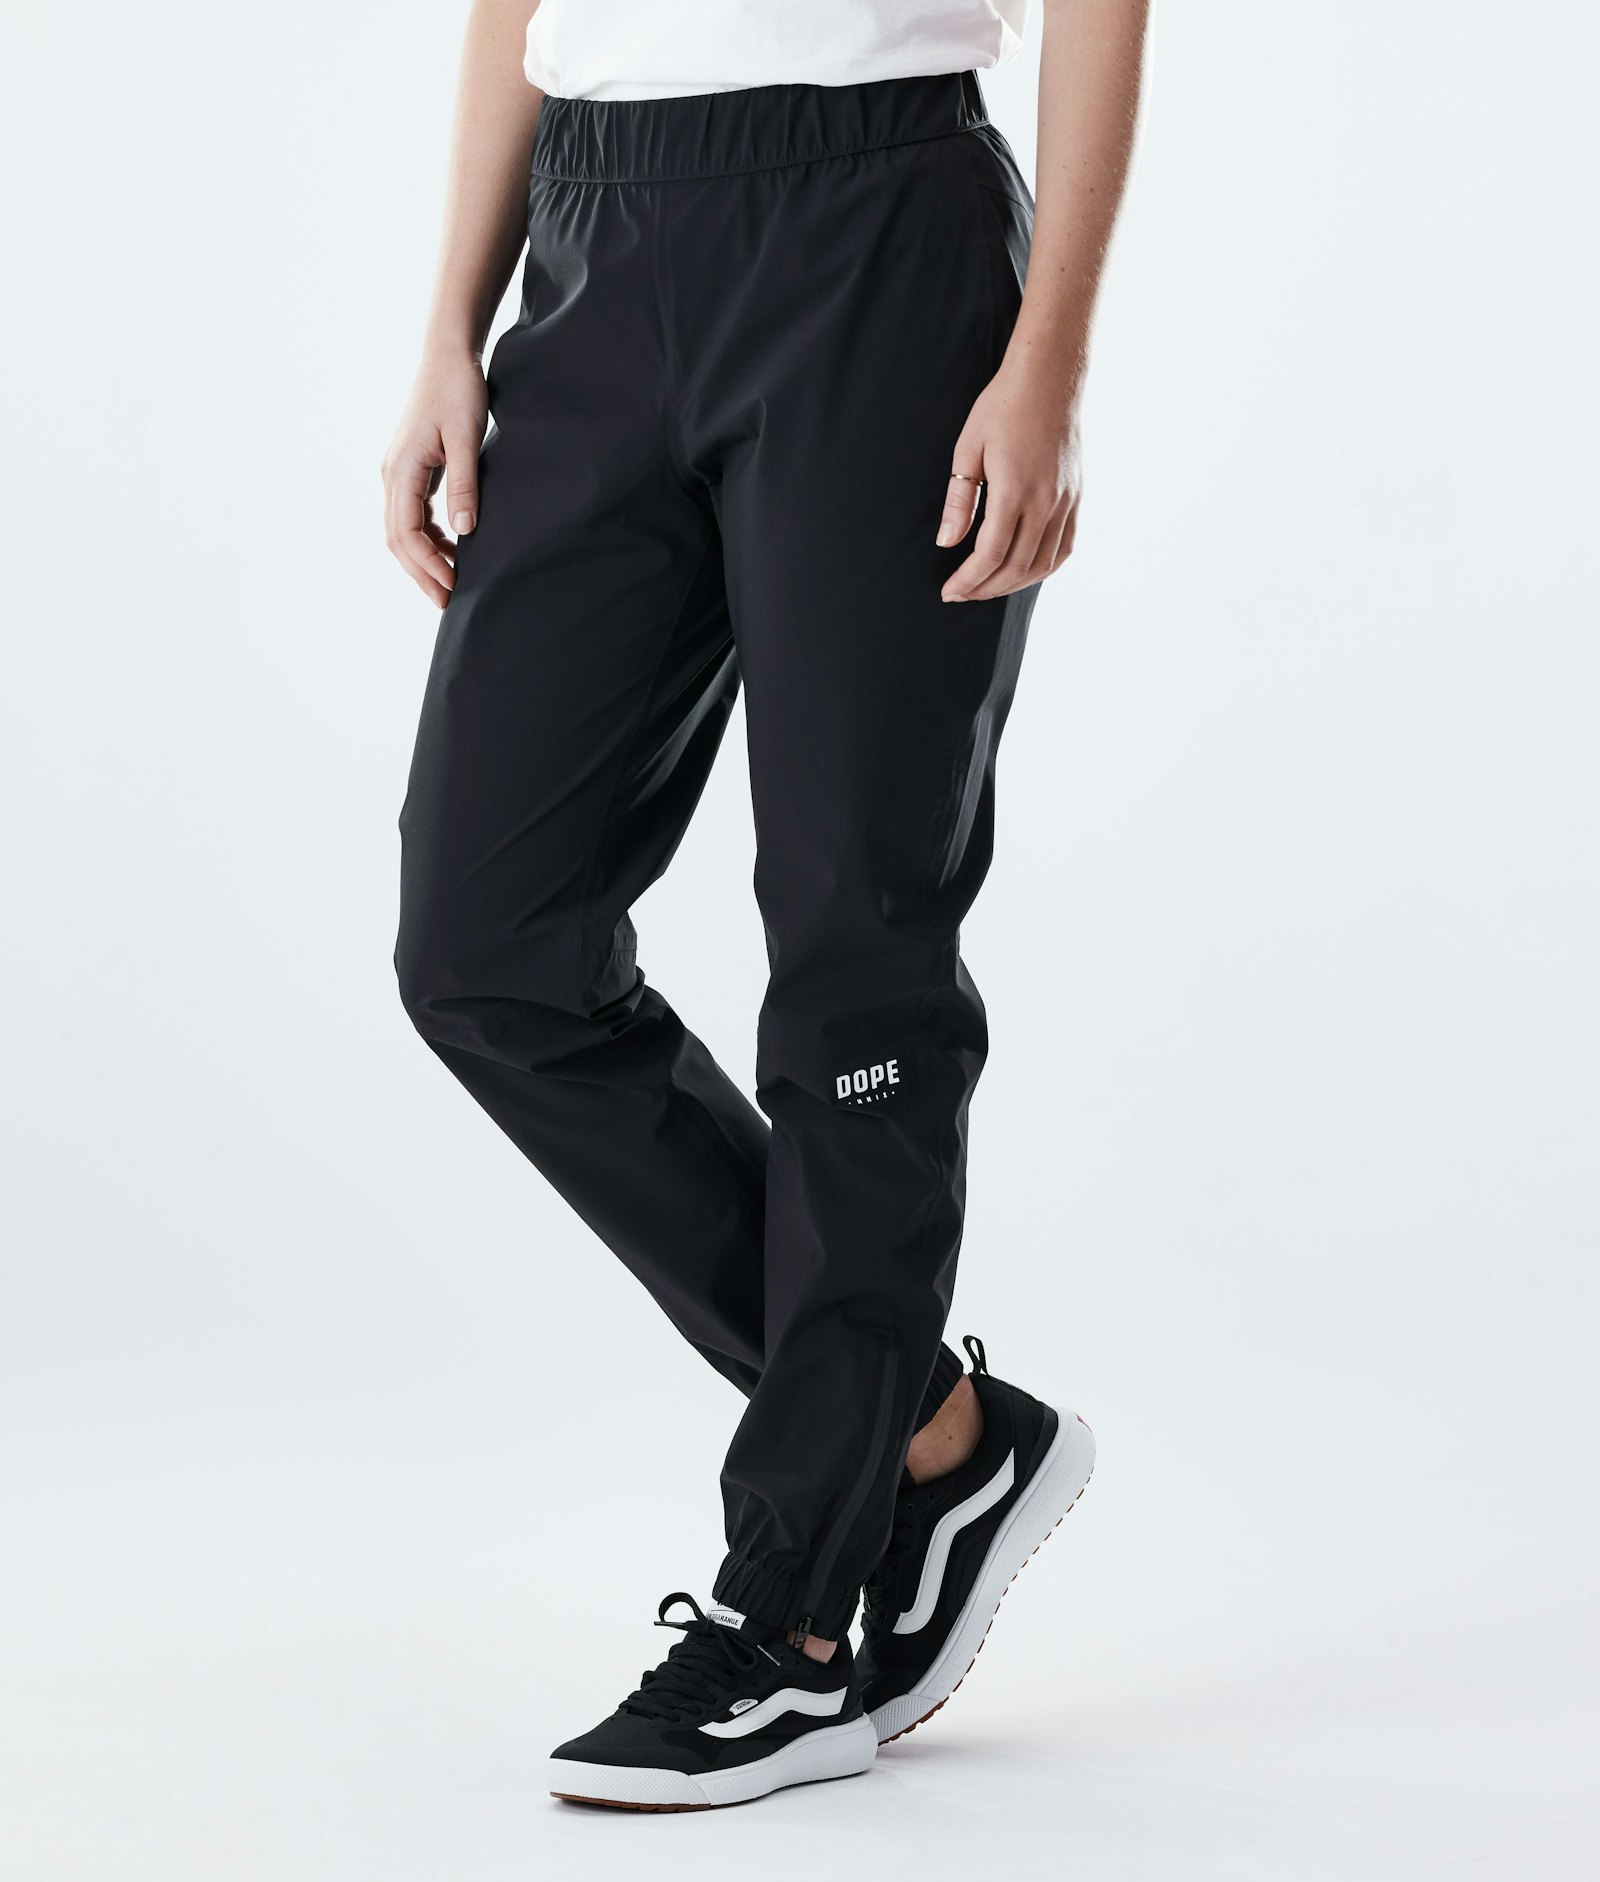 Dope Drizzard W Pantalones Impermeables Mujer Black - Negro